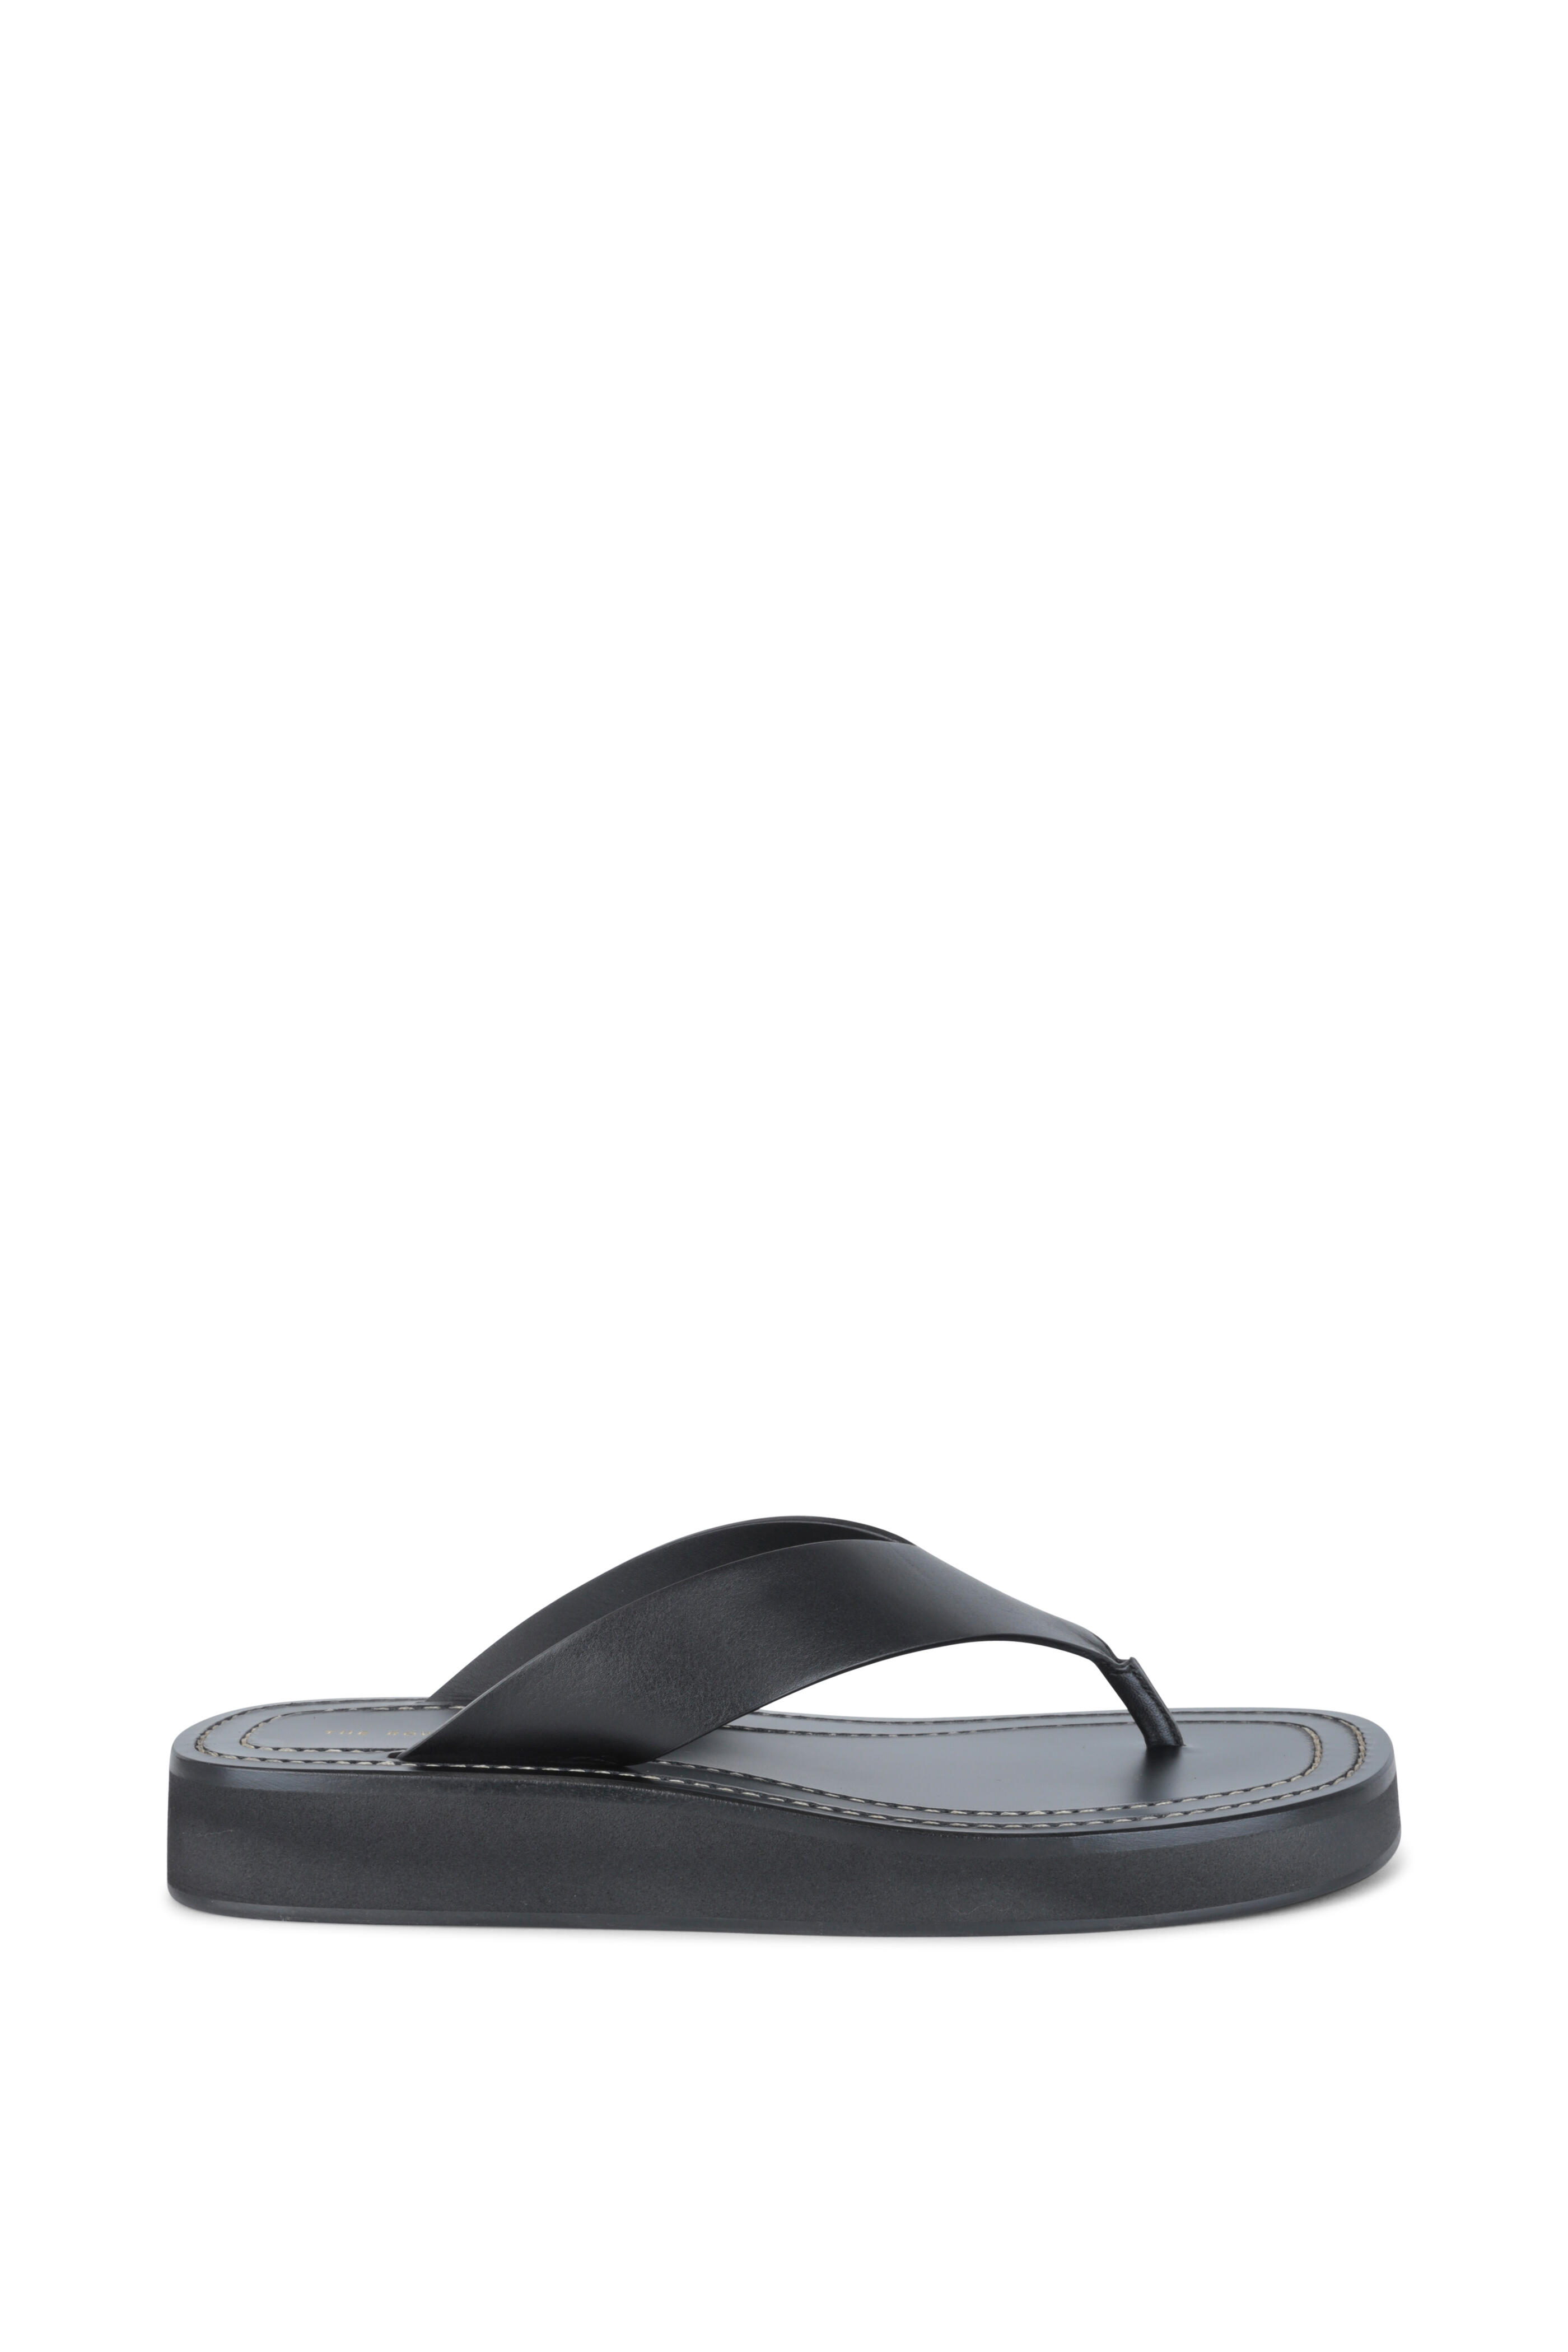 The Row - Ginza Black Leather Thong Sandal | Mitchell Stores